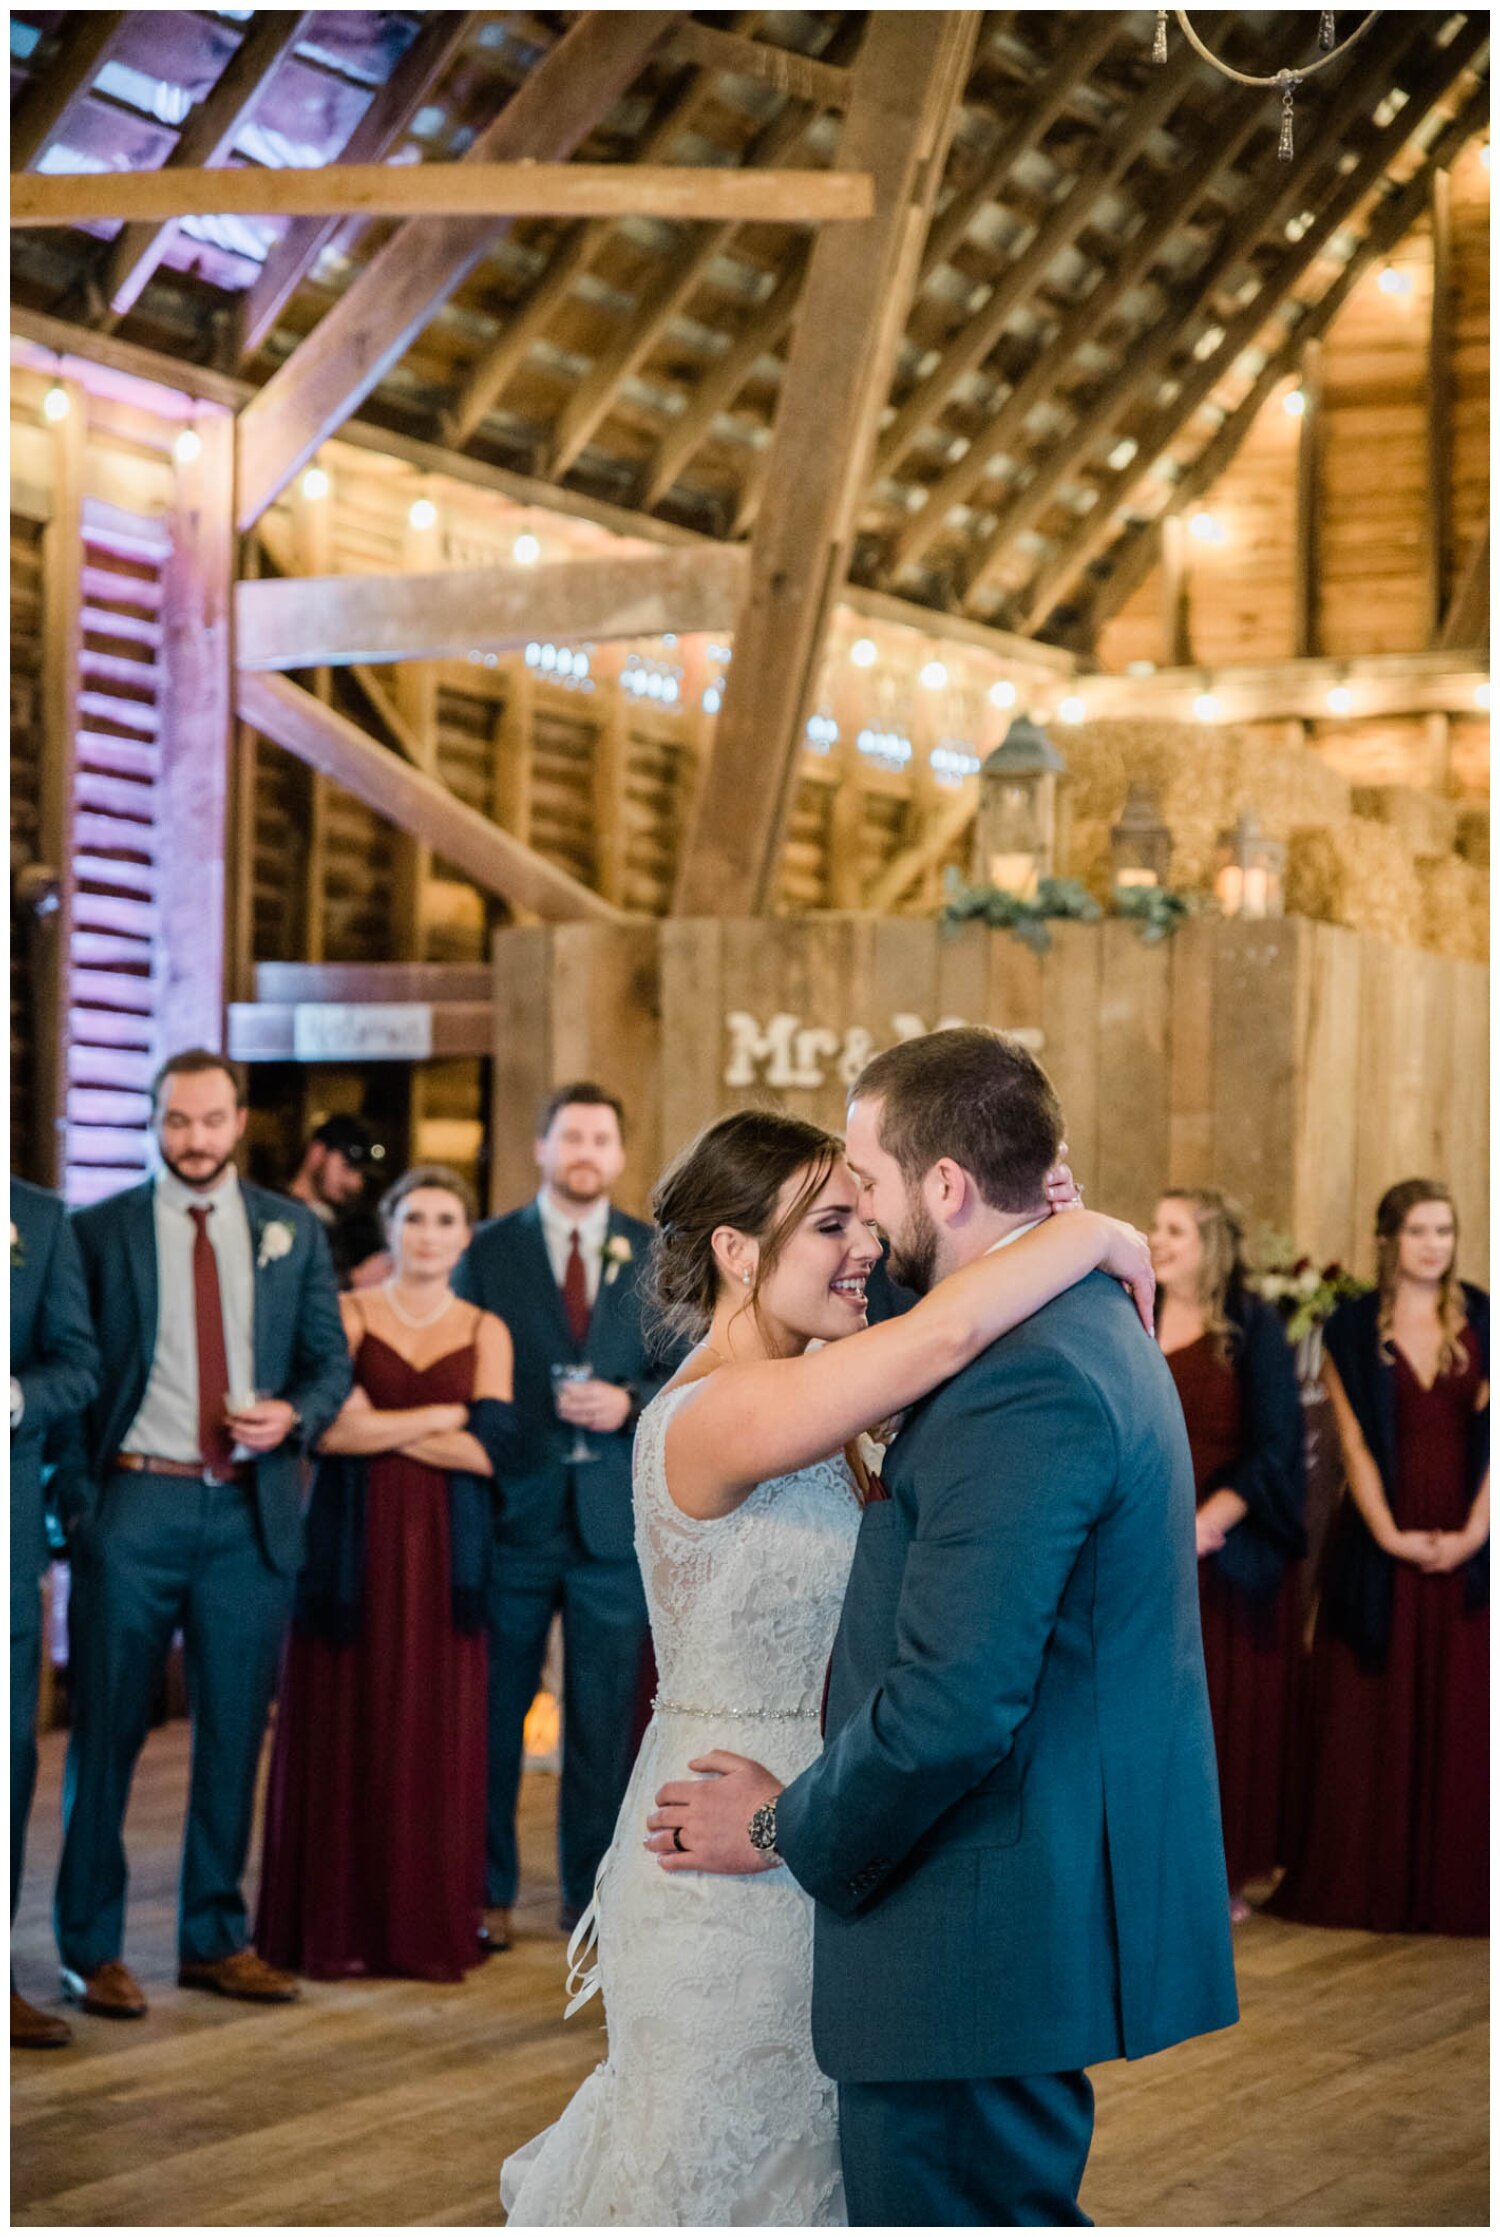 Red August Farm Wedding reception bride and groom first dance